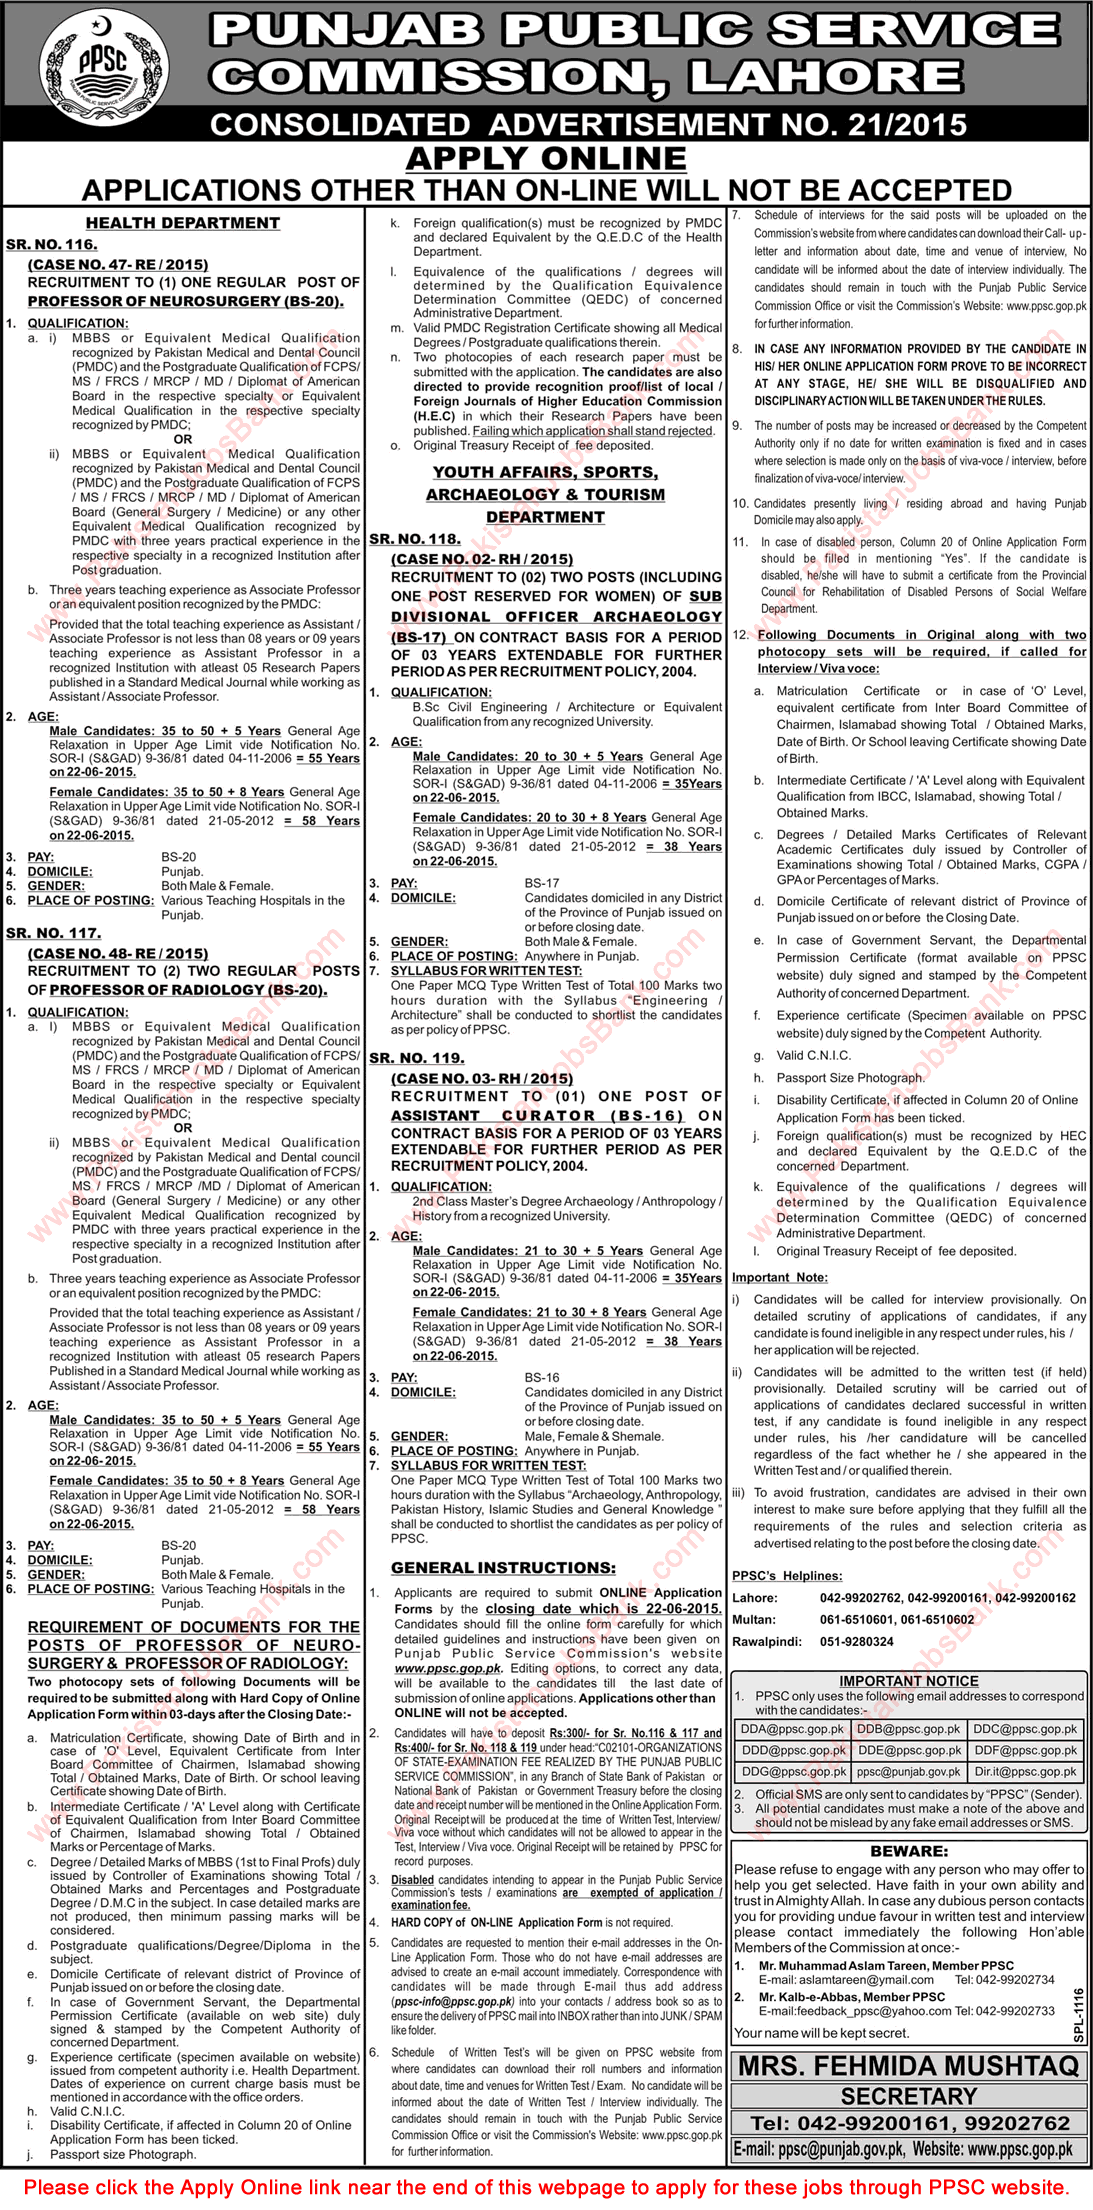 PPSC Jobs June 2015 Consolidated Advertisement No. 21/2015 Apply Online Latest / New